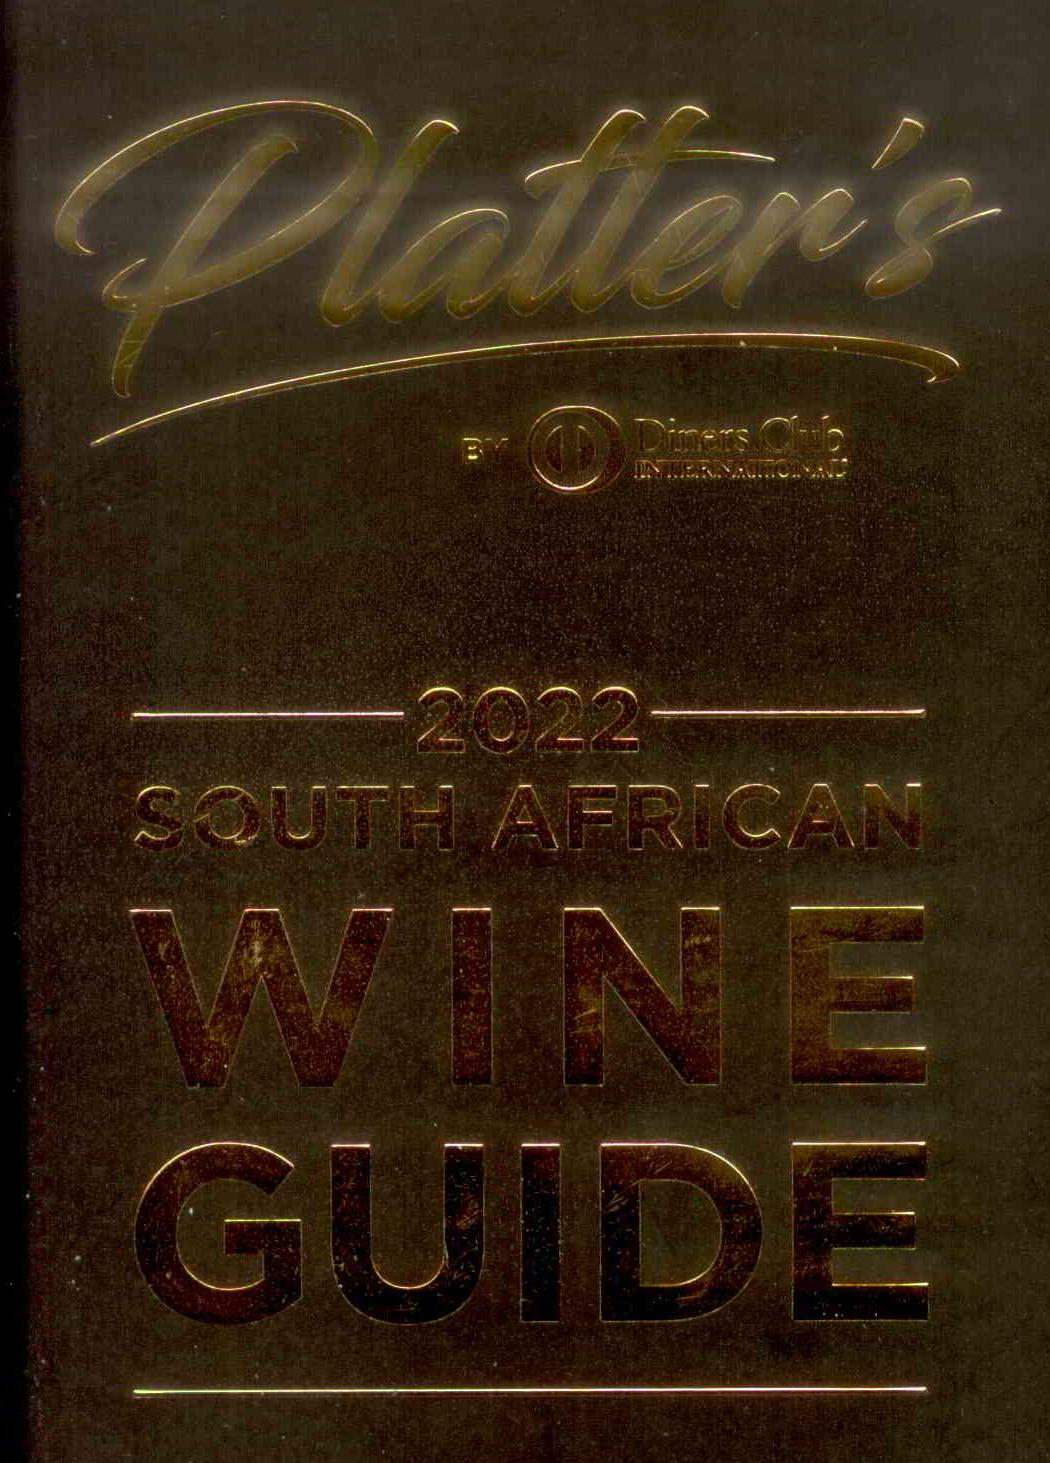 Percy Tours in 2022 John Platter South Africa Wine book